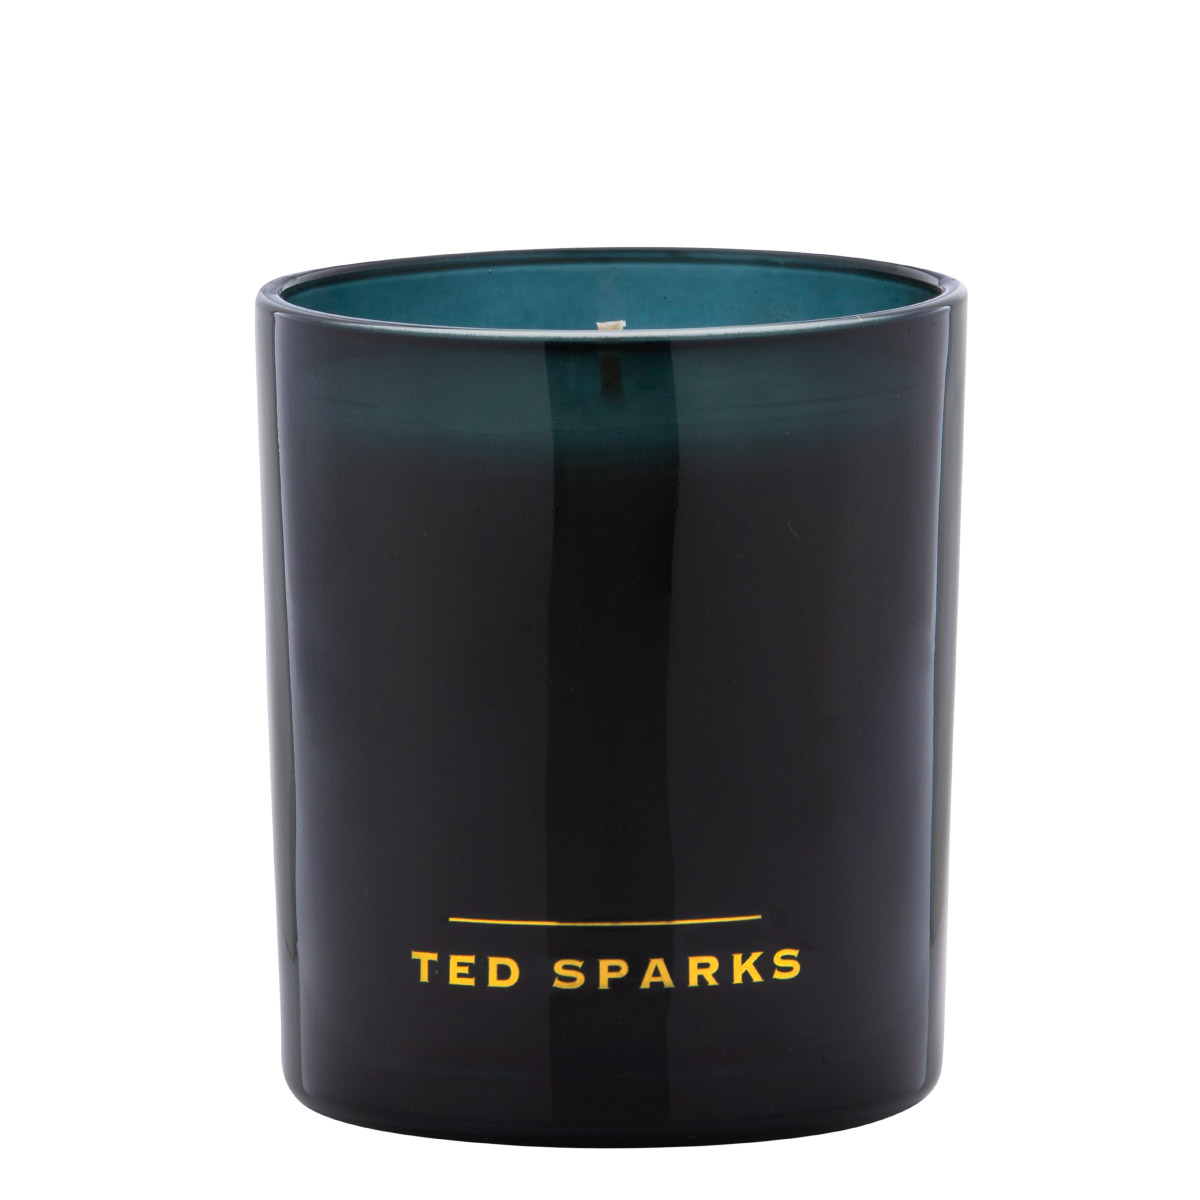 Bamboo & Peony - Demi Duftkerze 290g von Ted Sparks